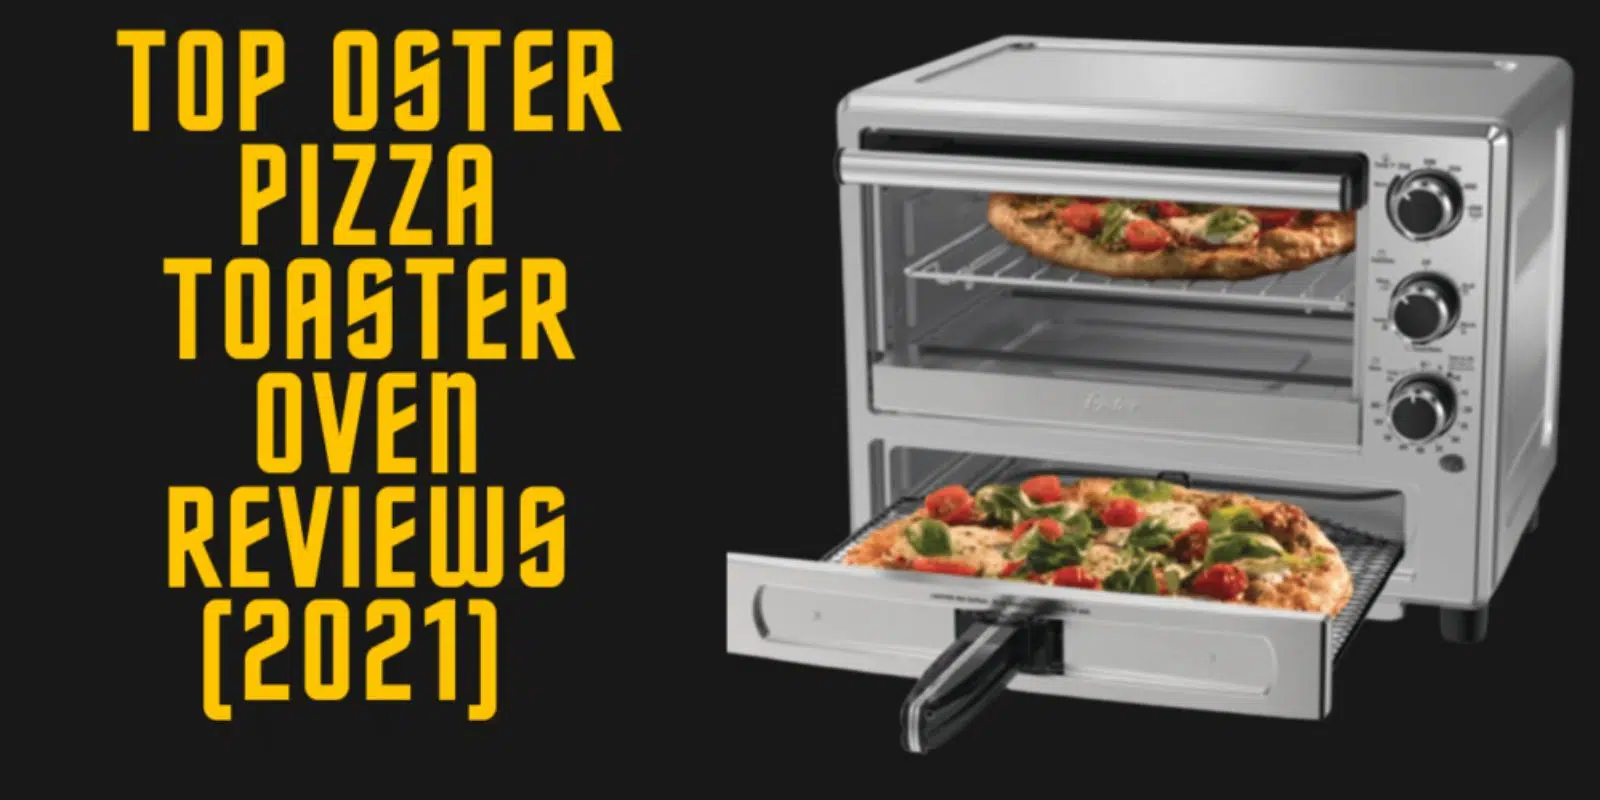 Oster Pizza Toaster Oven Reviews: The Best Toaster Oven For Pizza